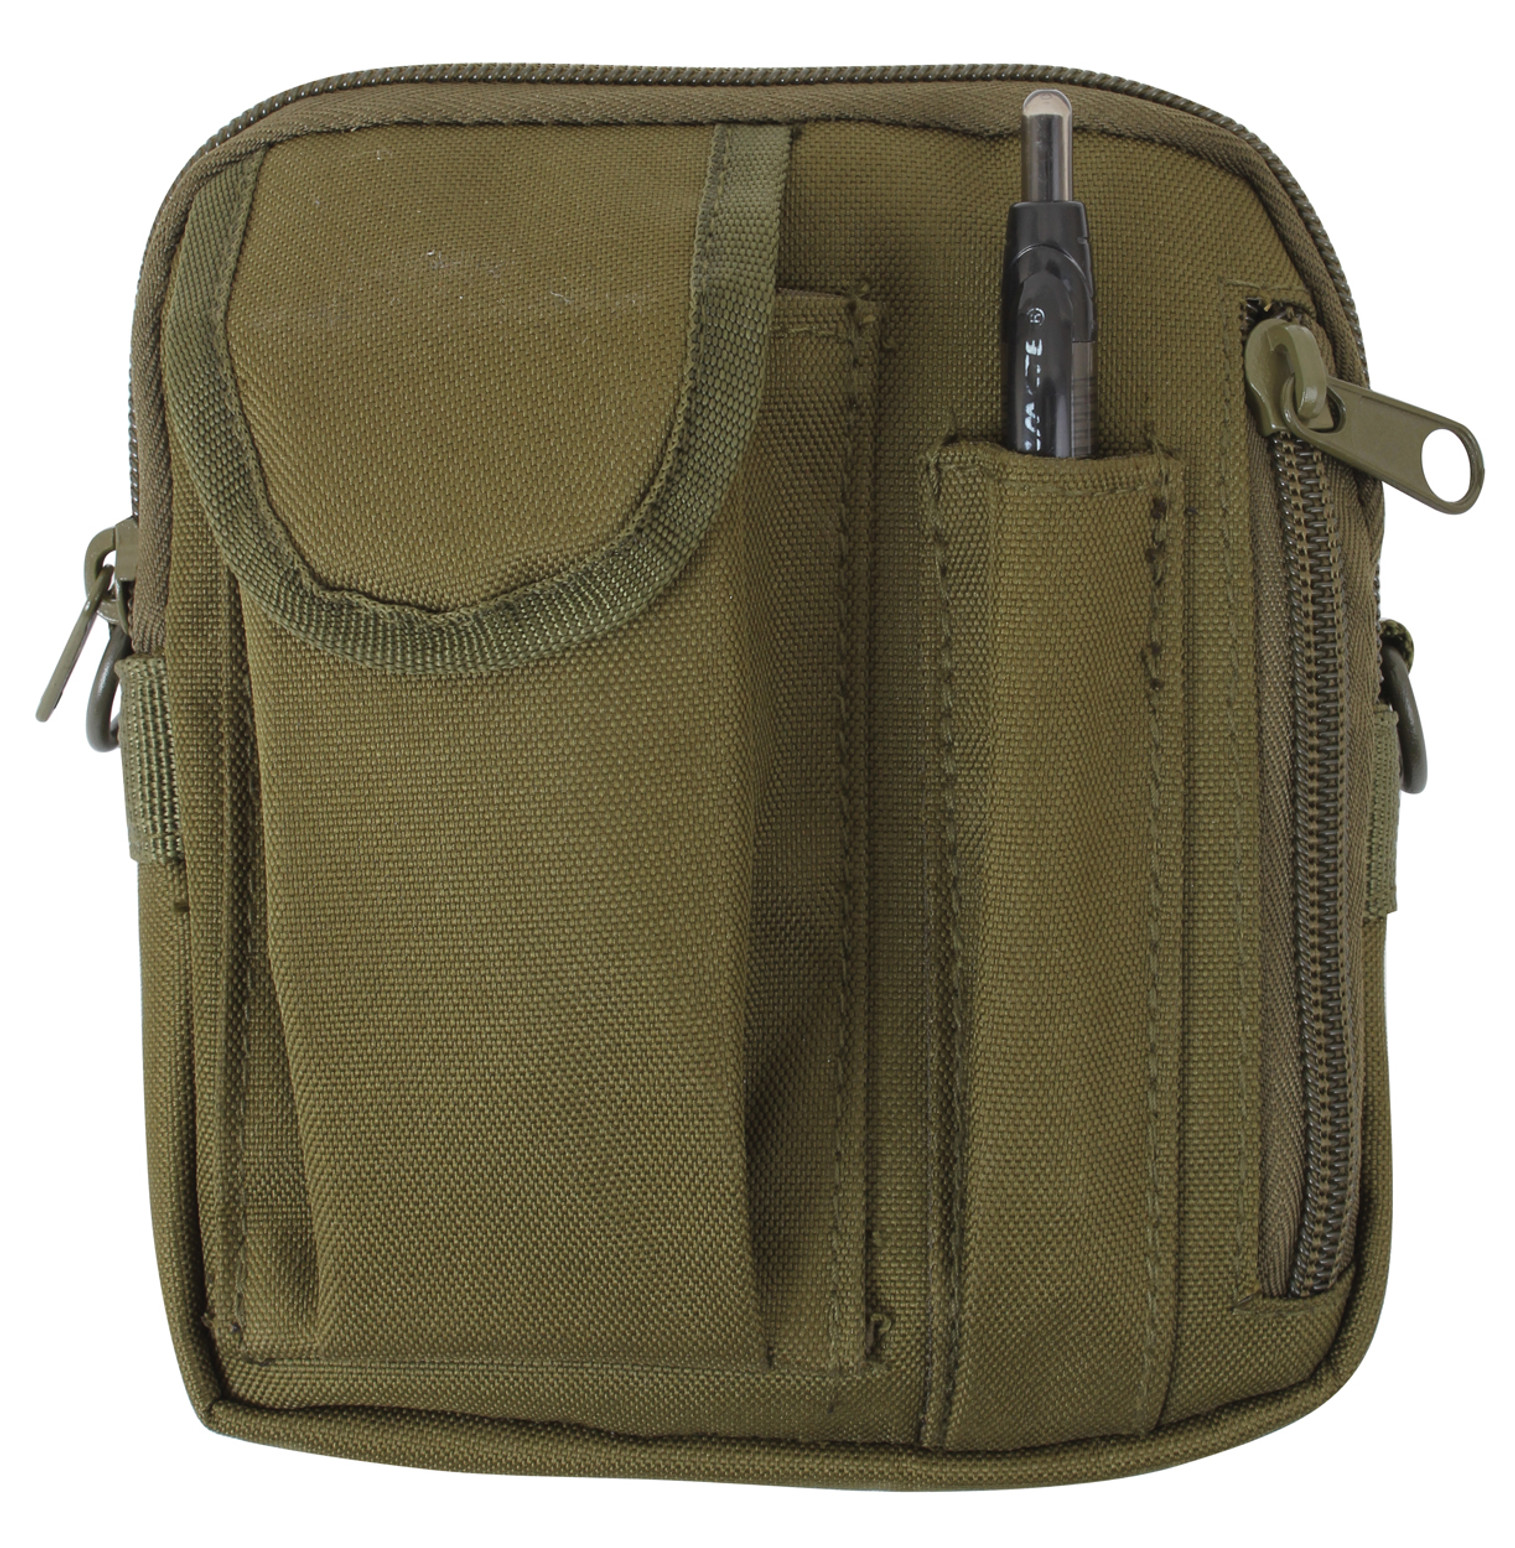 Rothco MOLLE Compatible Excursion Organizer - Olive Drab